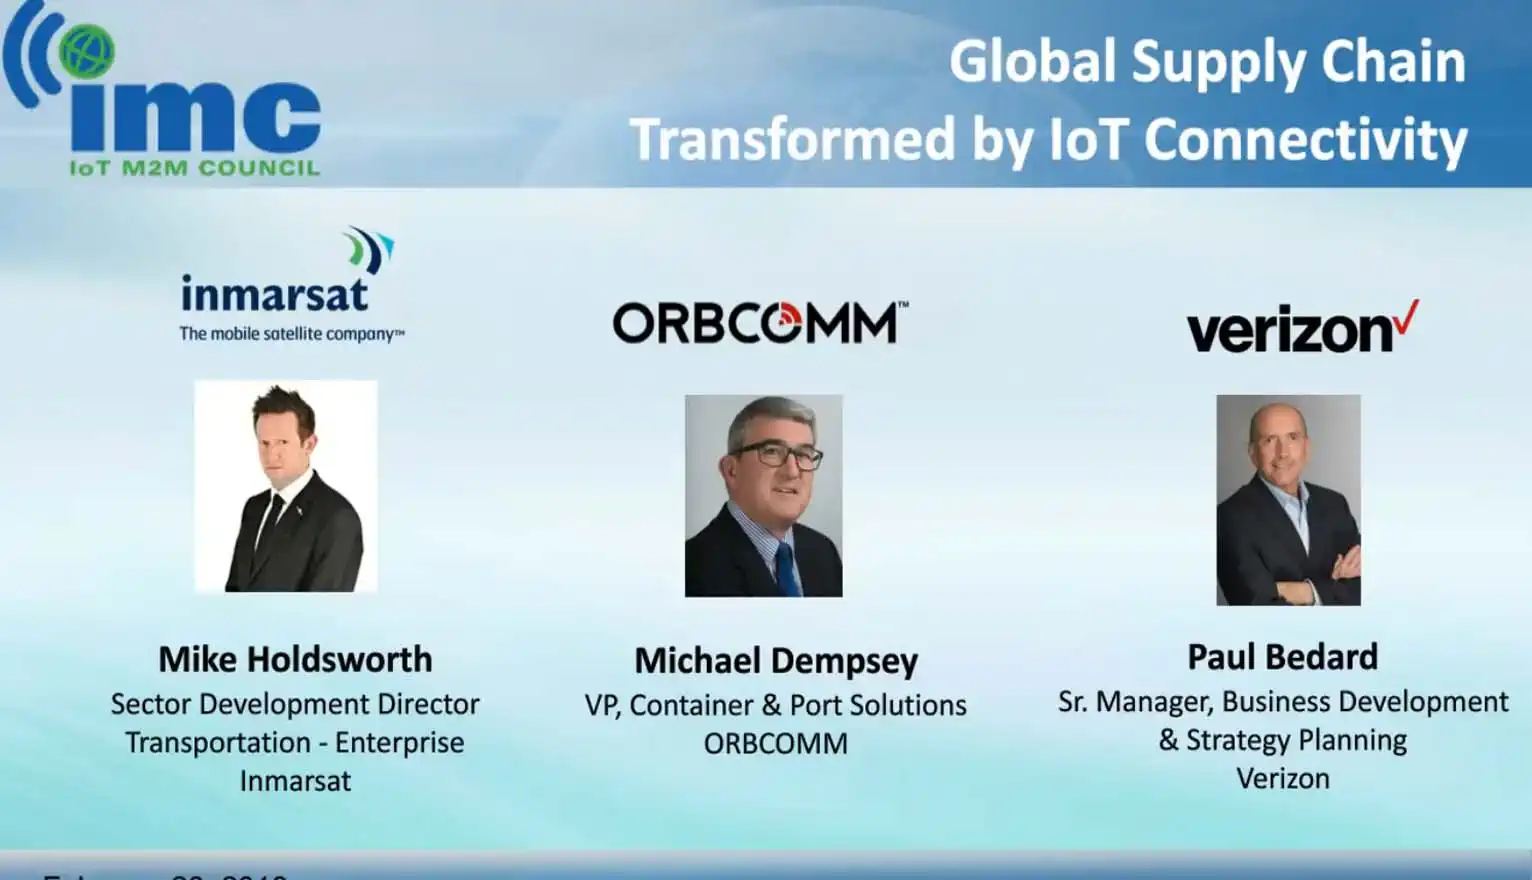 Supply chains by IoT Connectivity 